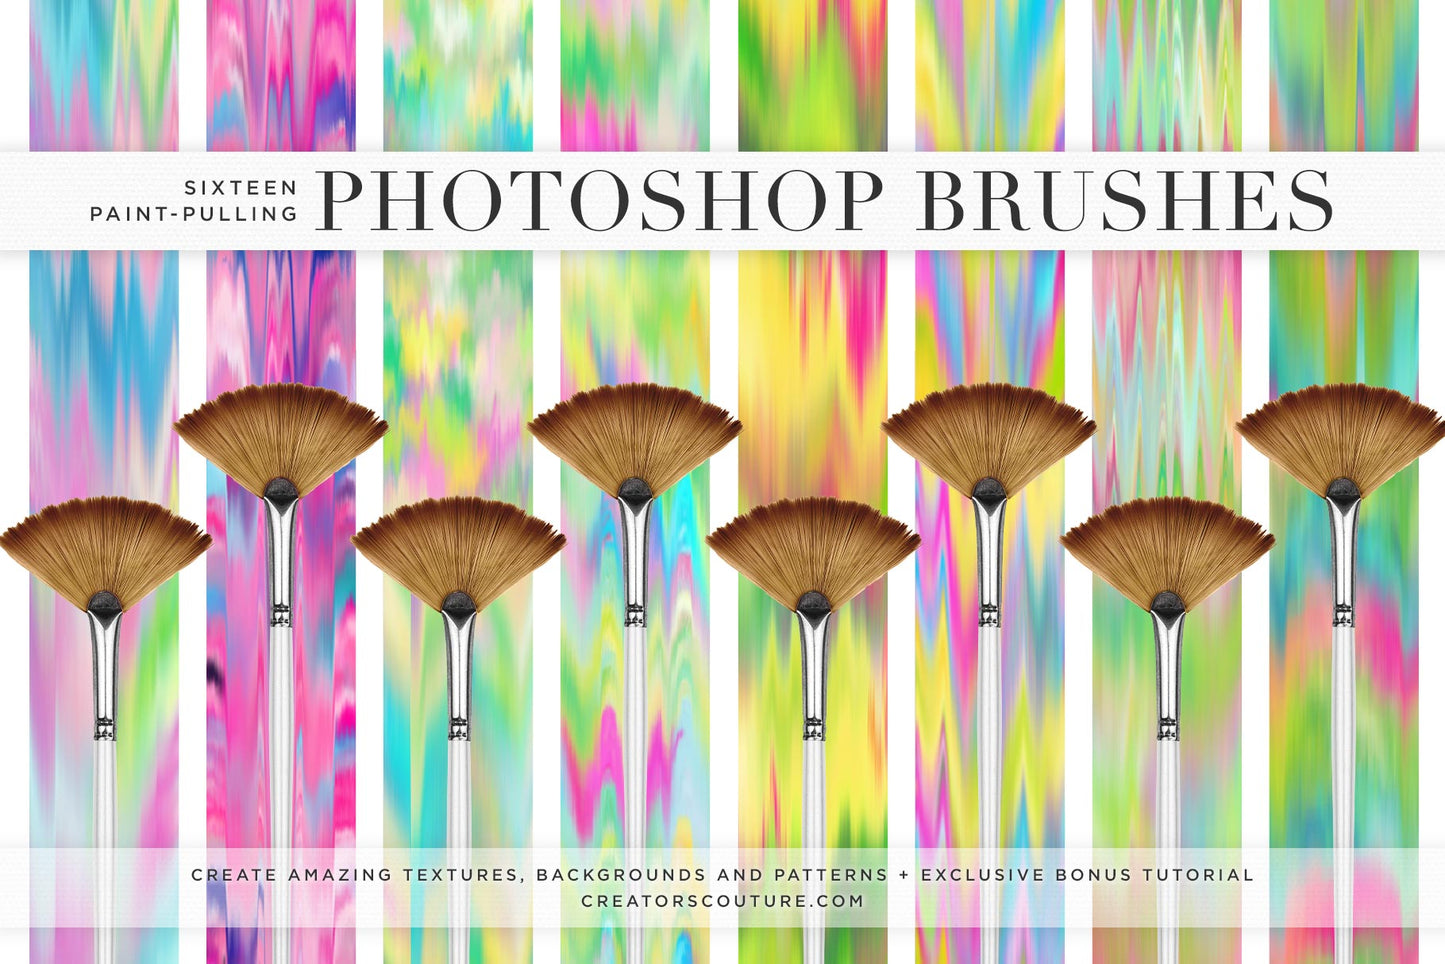 Magic Wet Paint-Pulling Photoshop Mixer Brushes + Exclusive Tutorial, cover image